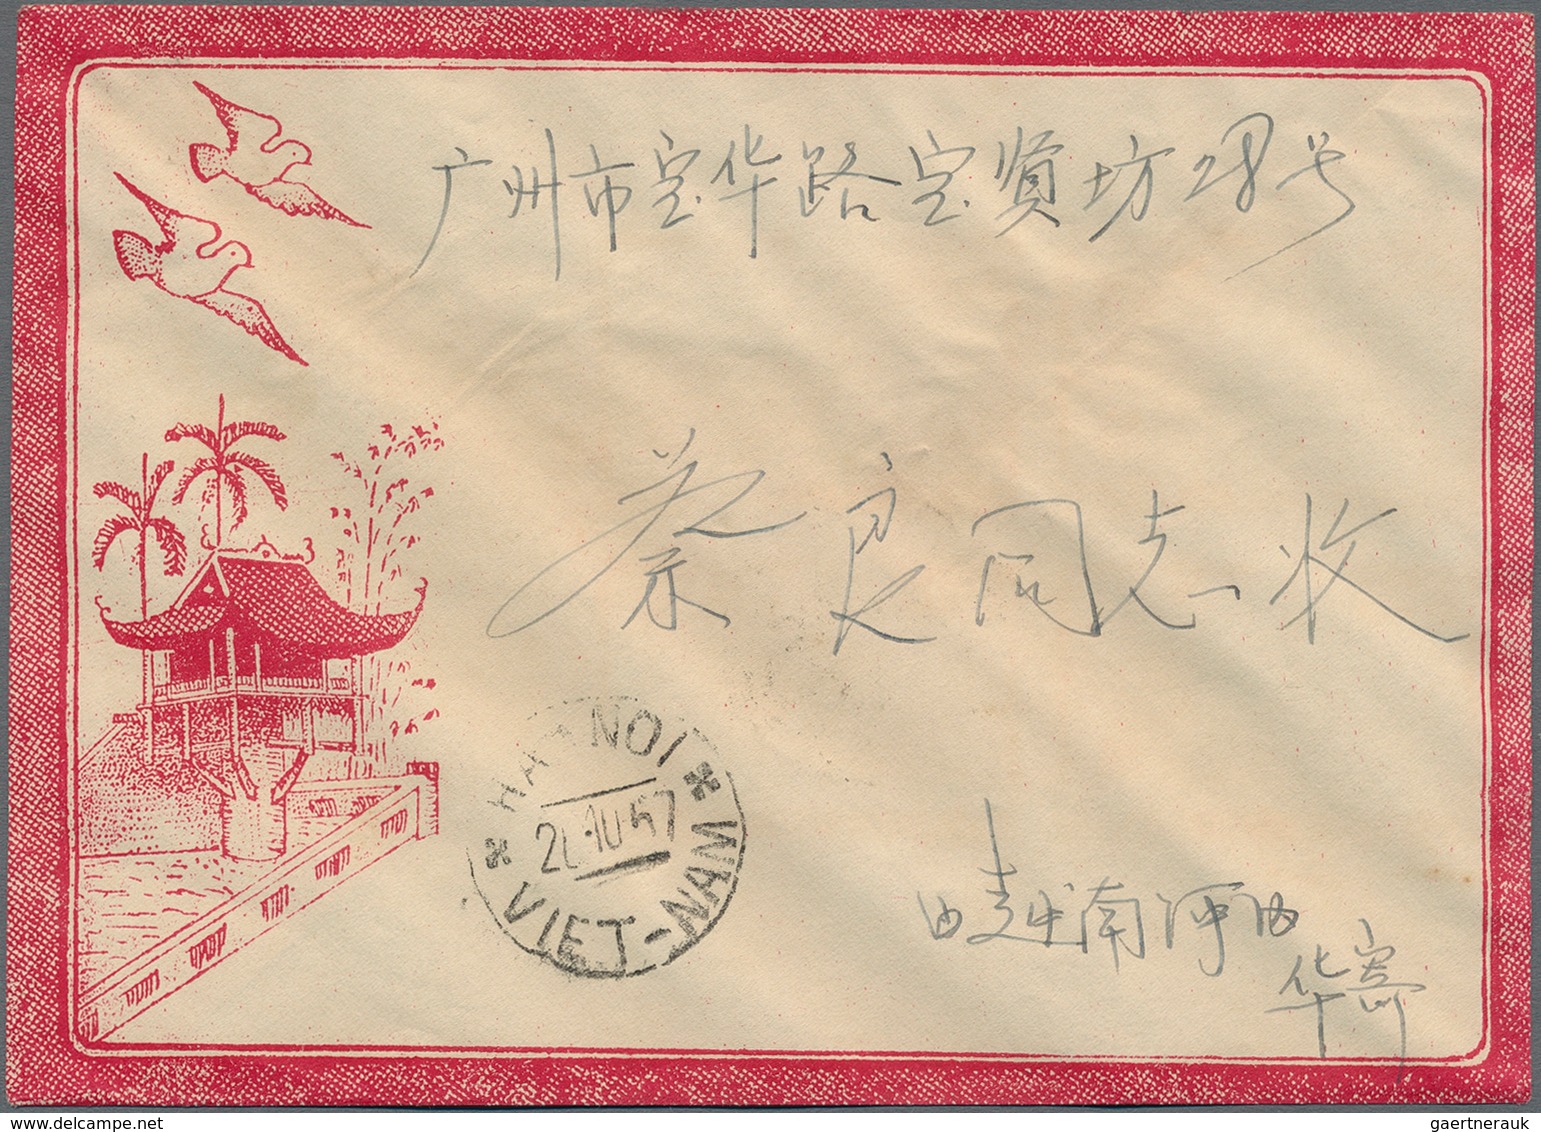 Vietnam-Nord (1945-1975): 1957. Nice Three Color Mixed Franking On A Decorated Envelope With Michel - Vietnam